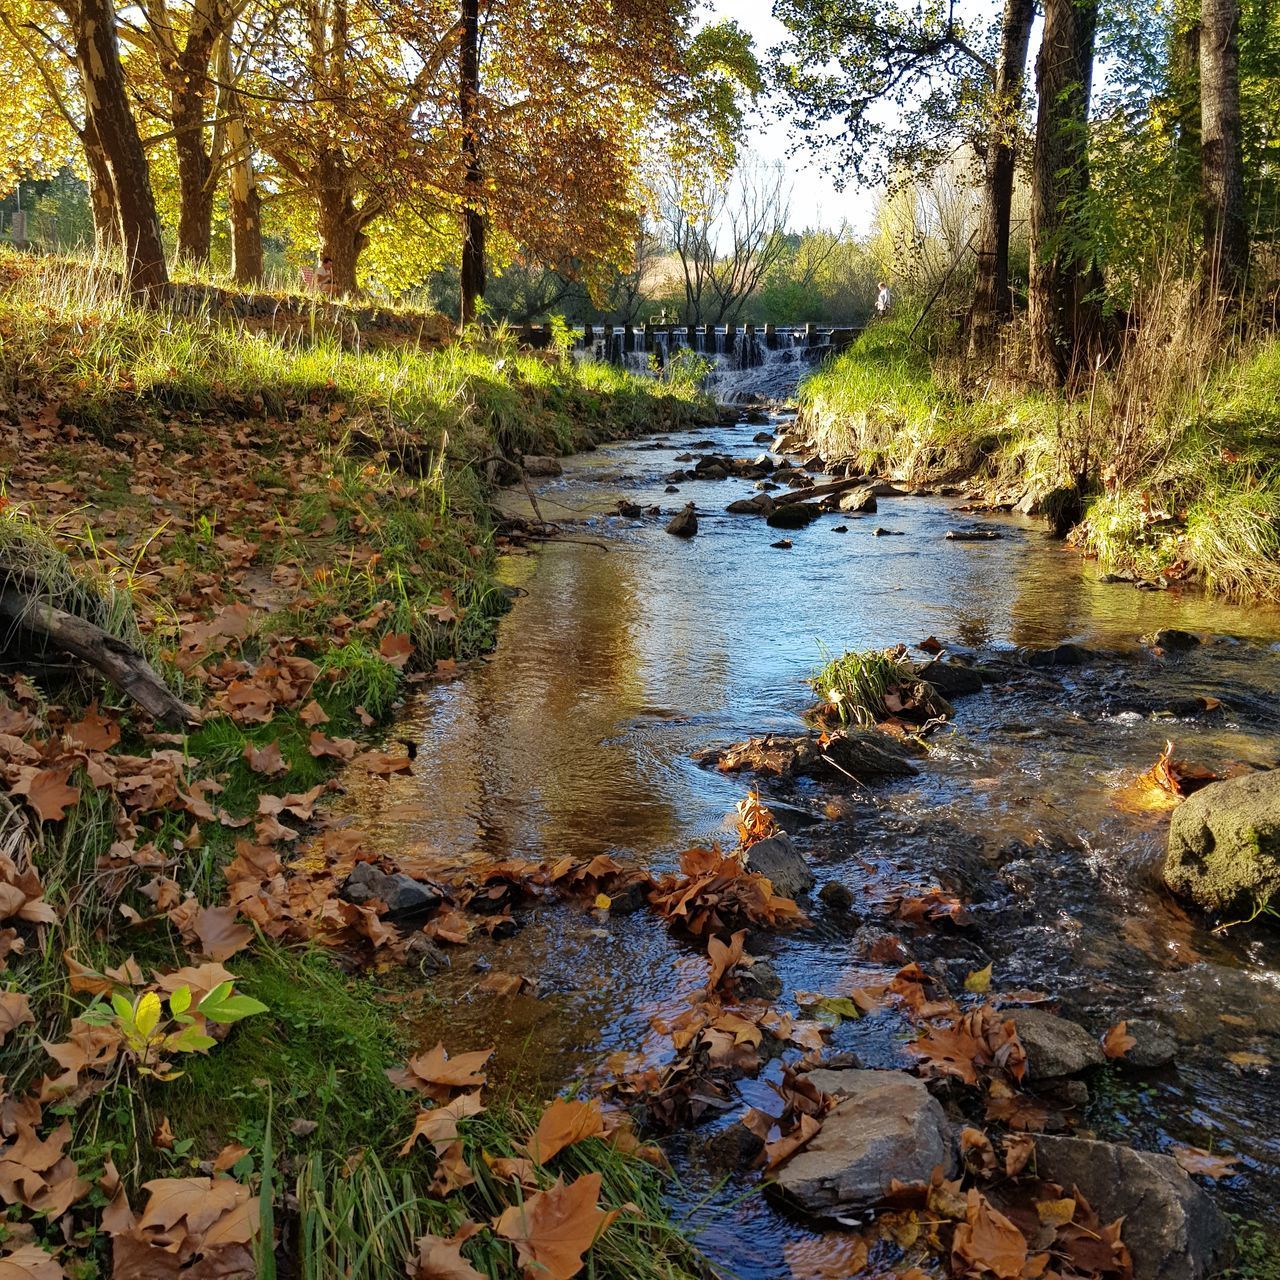 STREAM FLOWING AMIDST TREES DURING AUTUMN